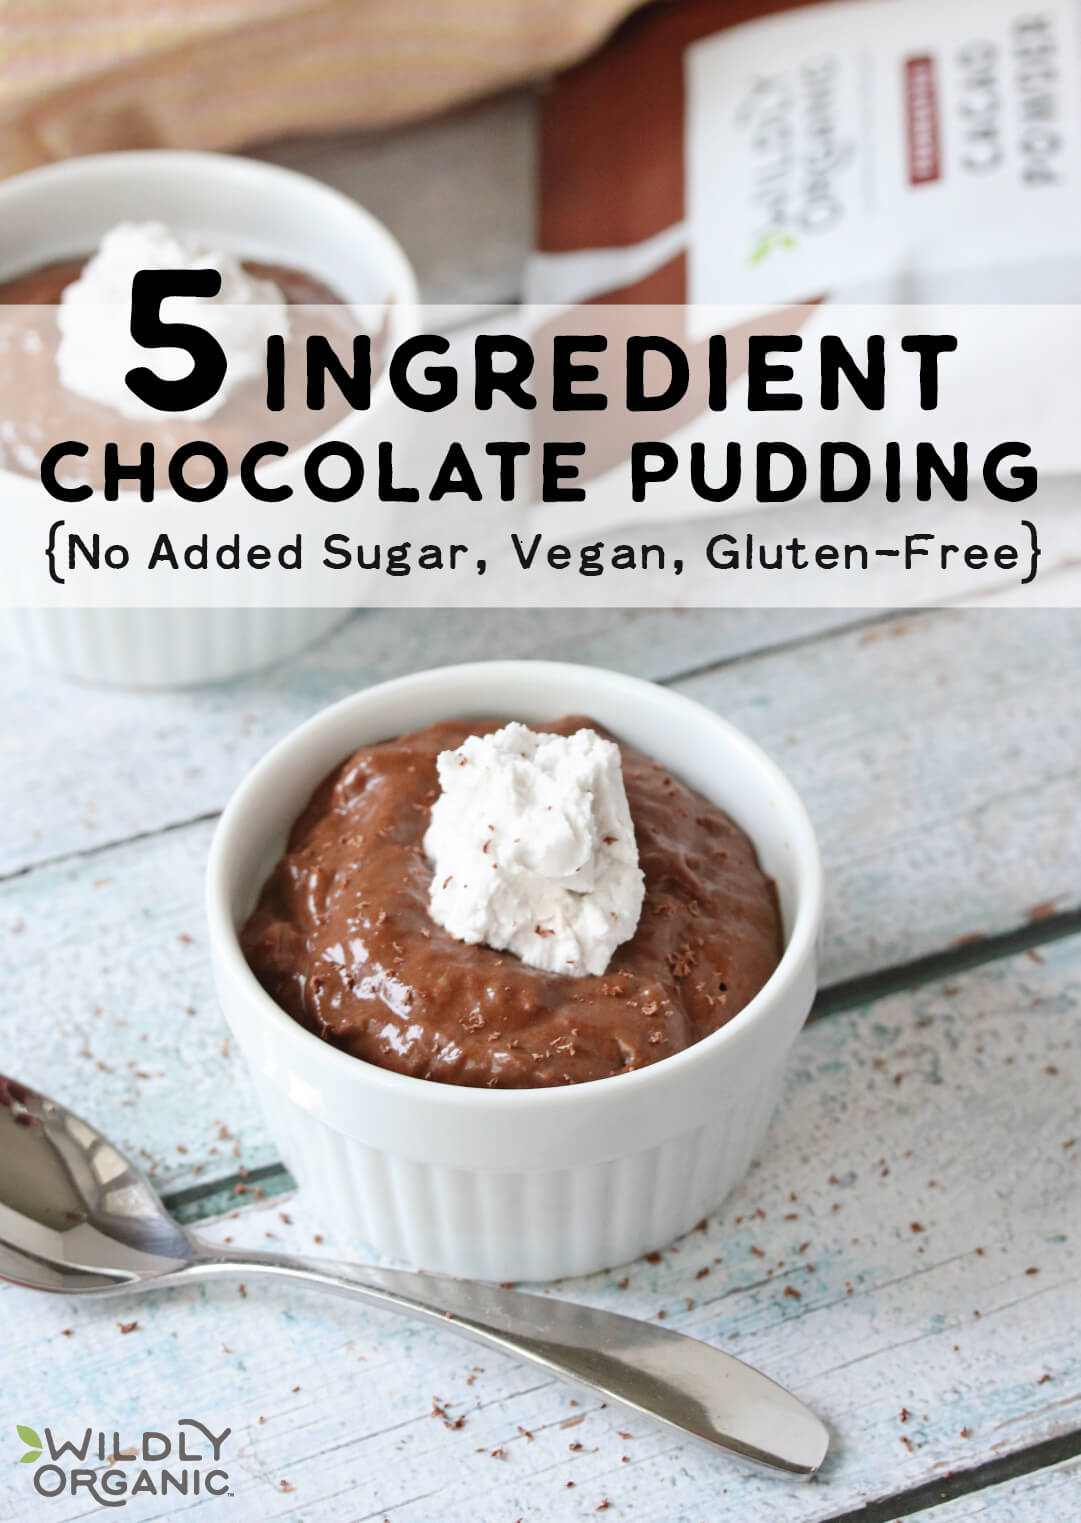 A photo of a ramekin filled with 5-ingredient chocolate pudding with fermented cacao powder.